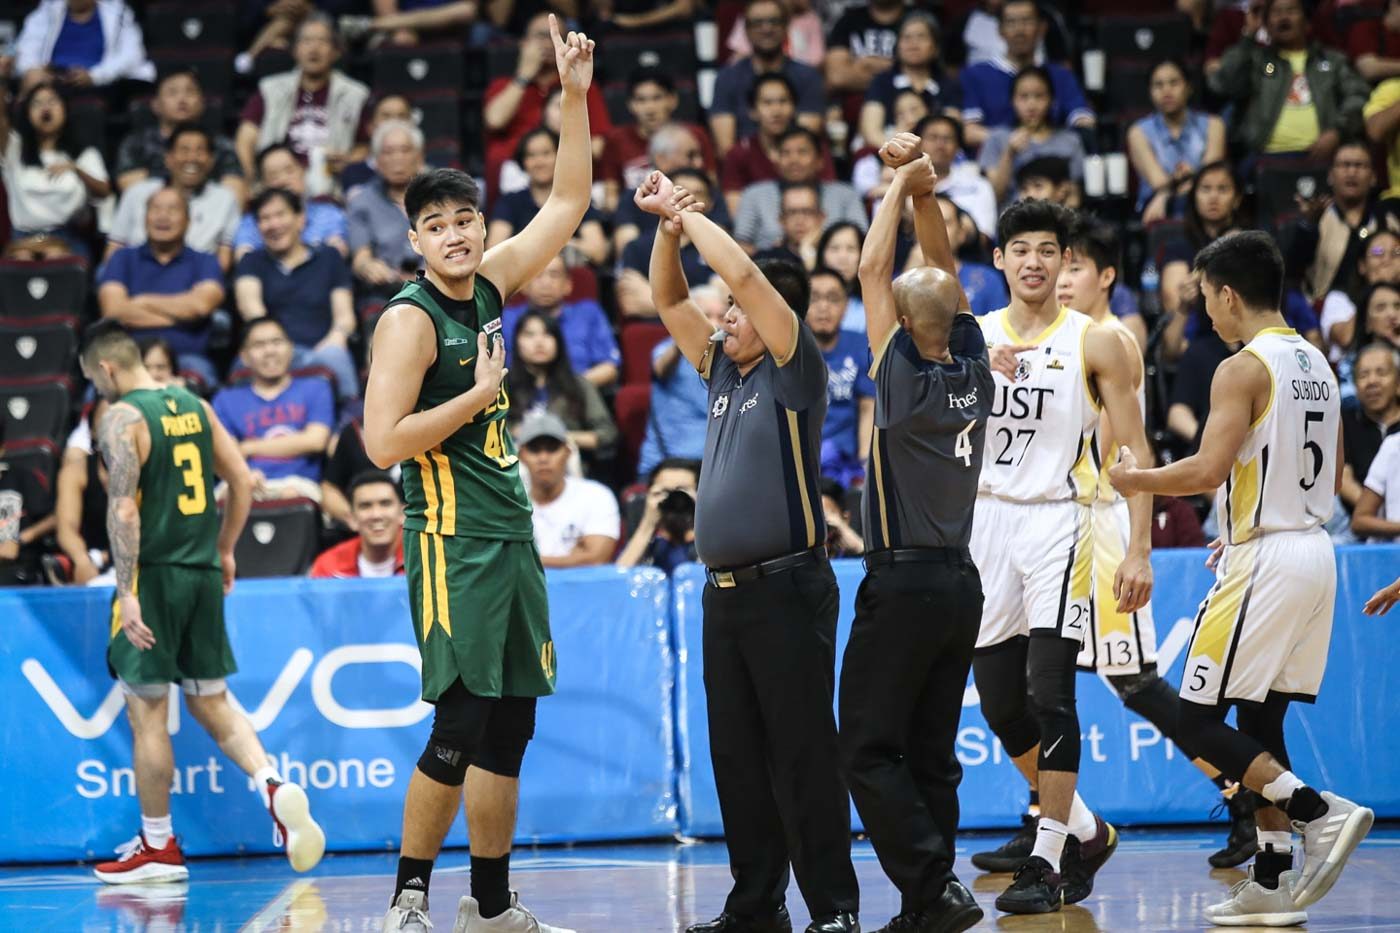 Arvin Tolentino questions ‘unfair’ treatment on disqualifying fouls